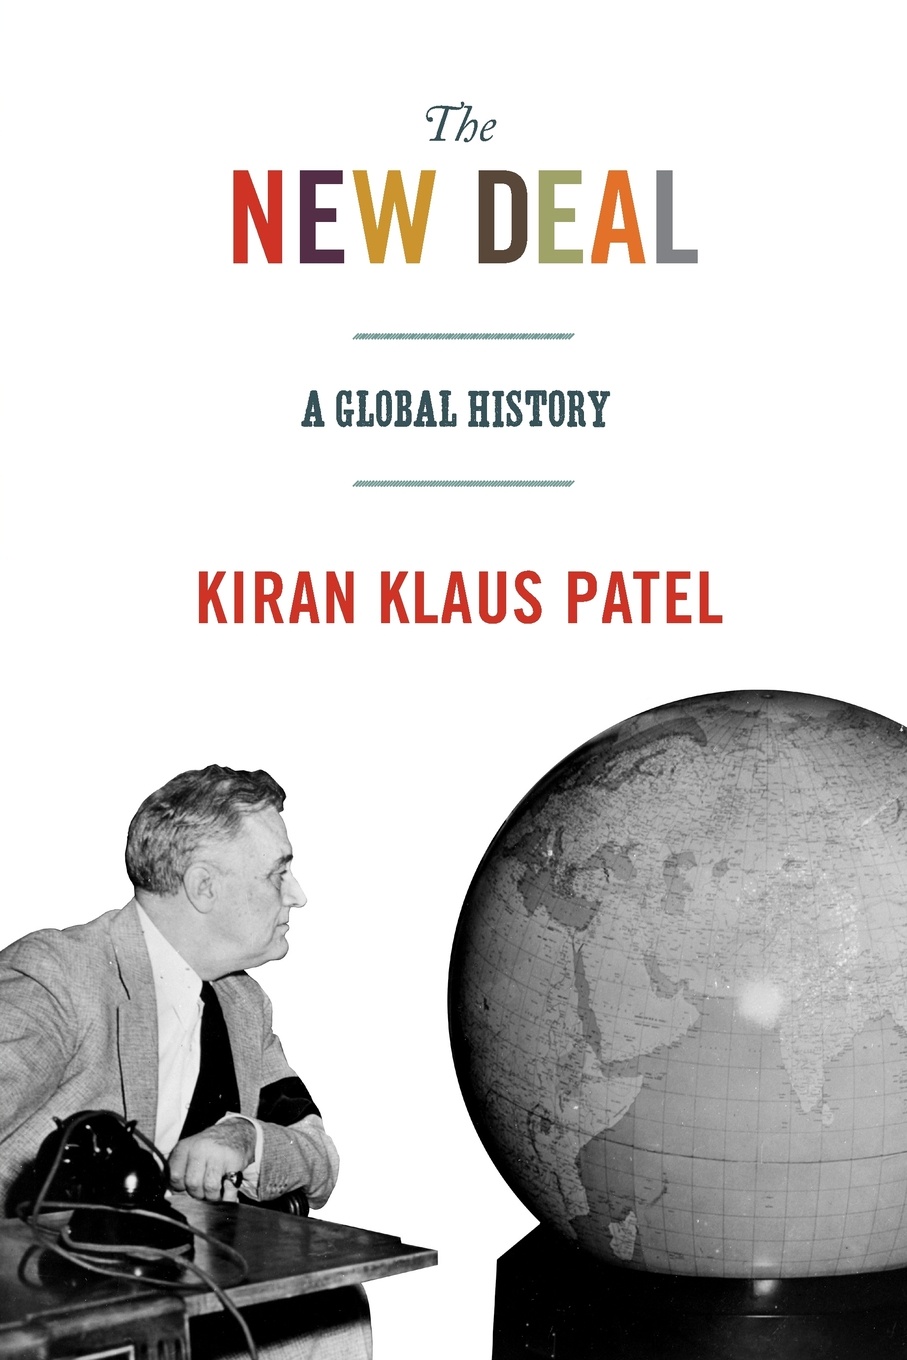 The New Deal. A Global History